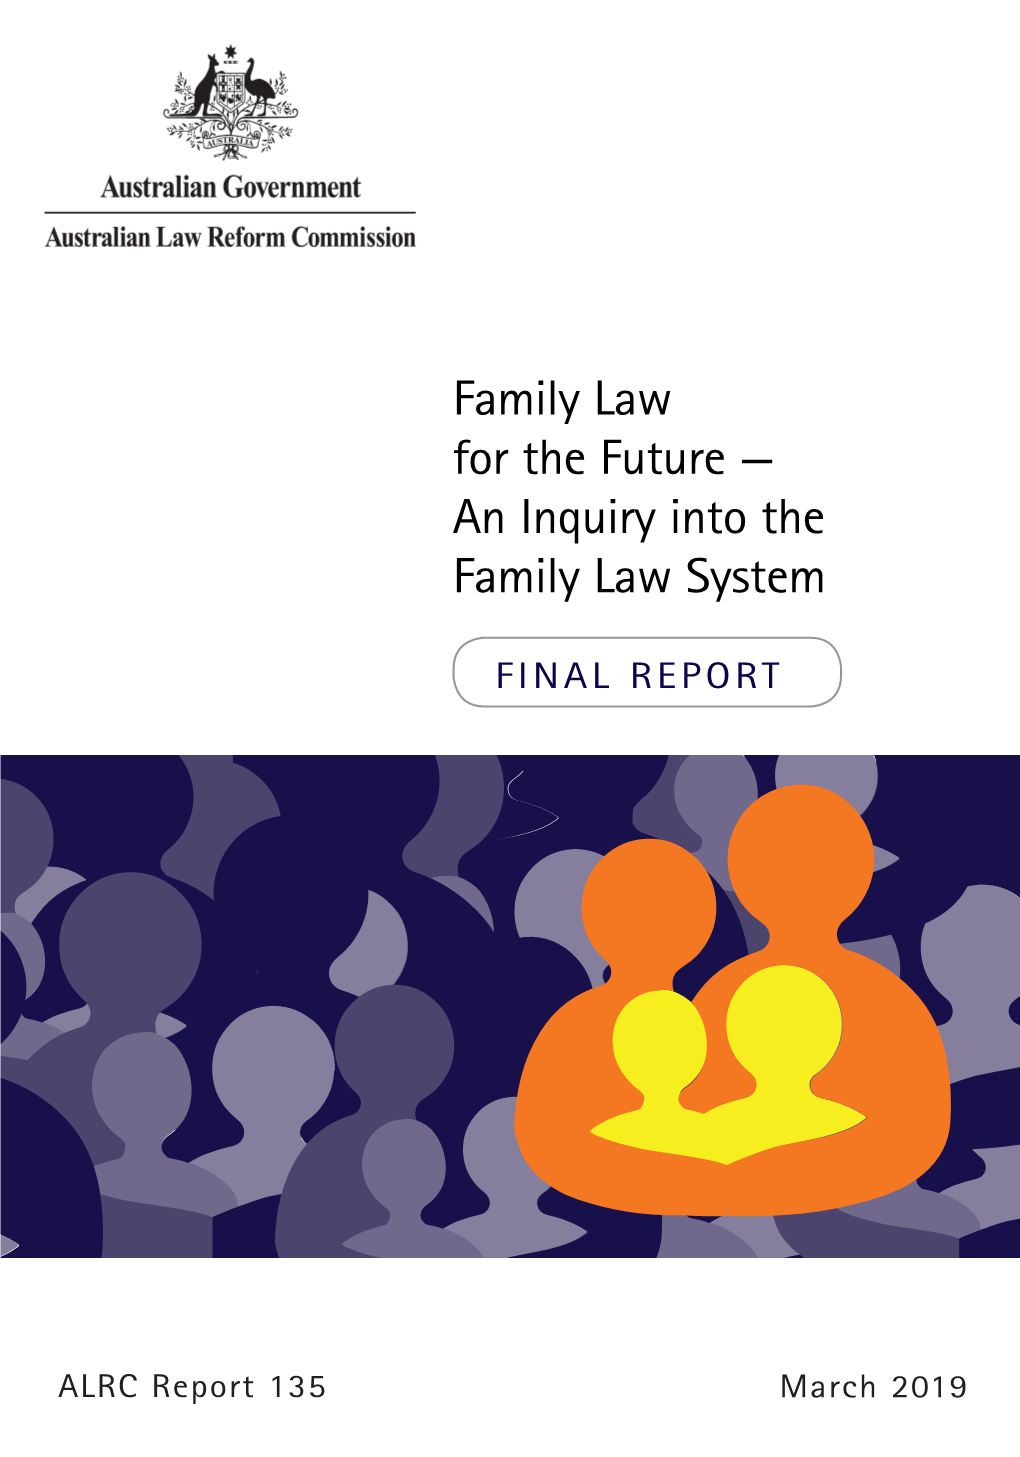 Family Law for the Future — an Inquiry Into the Family Law System